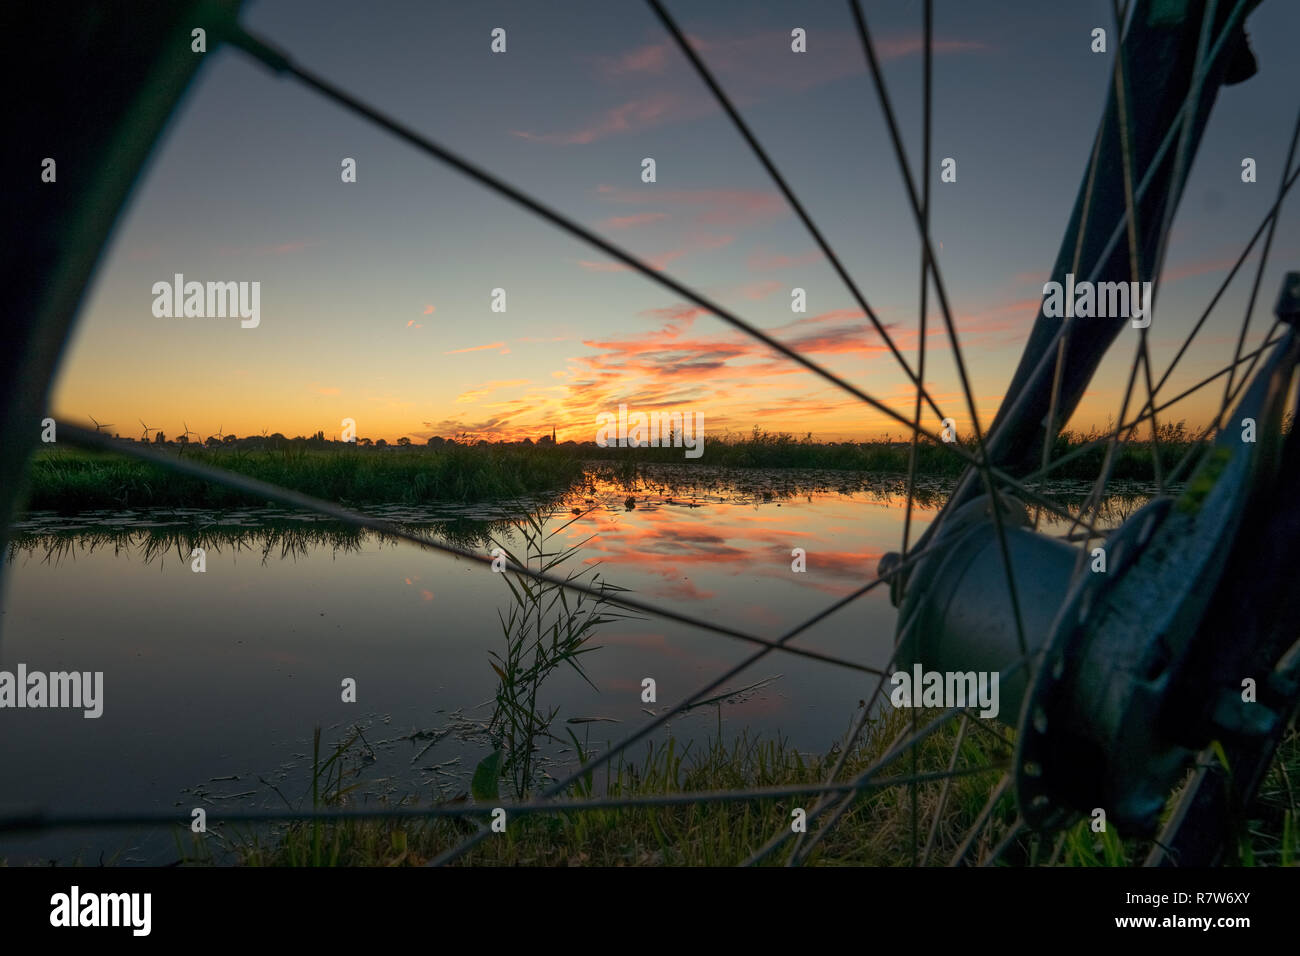 A beautiful sunset with reflections in the water of a lake, as seen through the wheel of a bicycle Stock Photo